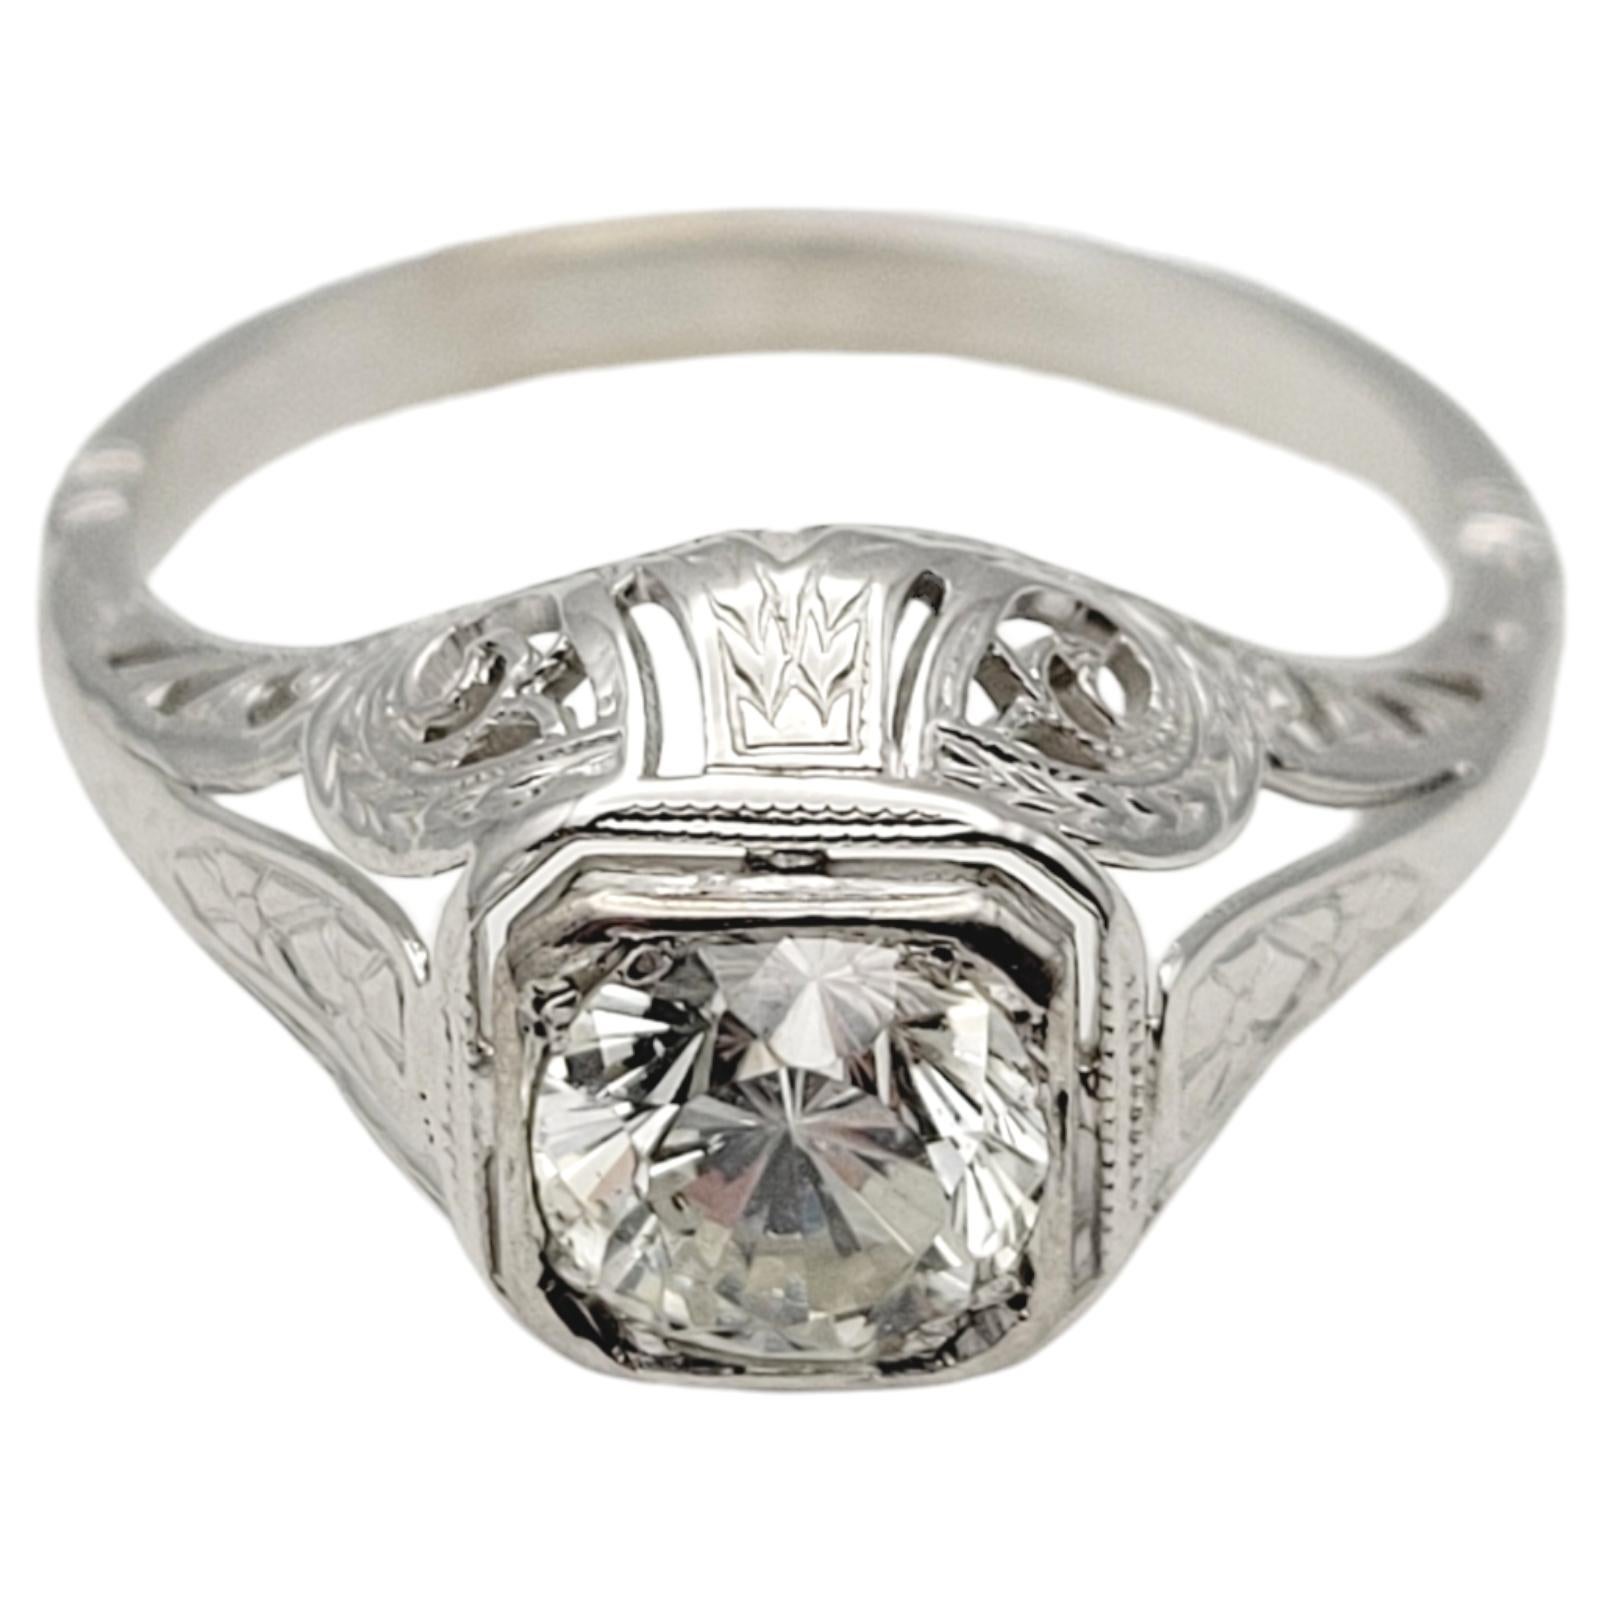 Contemporary Vintage 0.83 Carat Solitaire Diamond Engagement Ring in 14 Karat White Gold For Sale